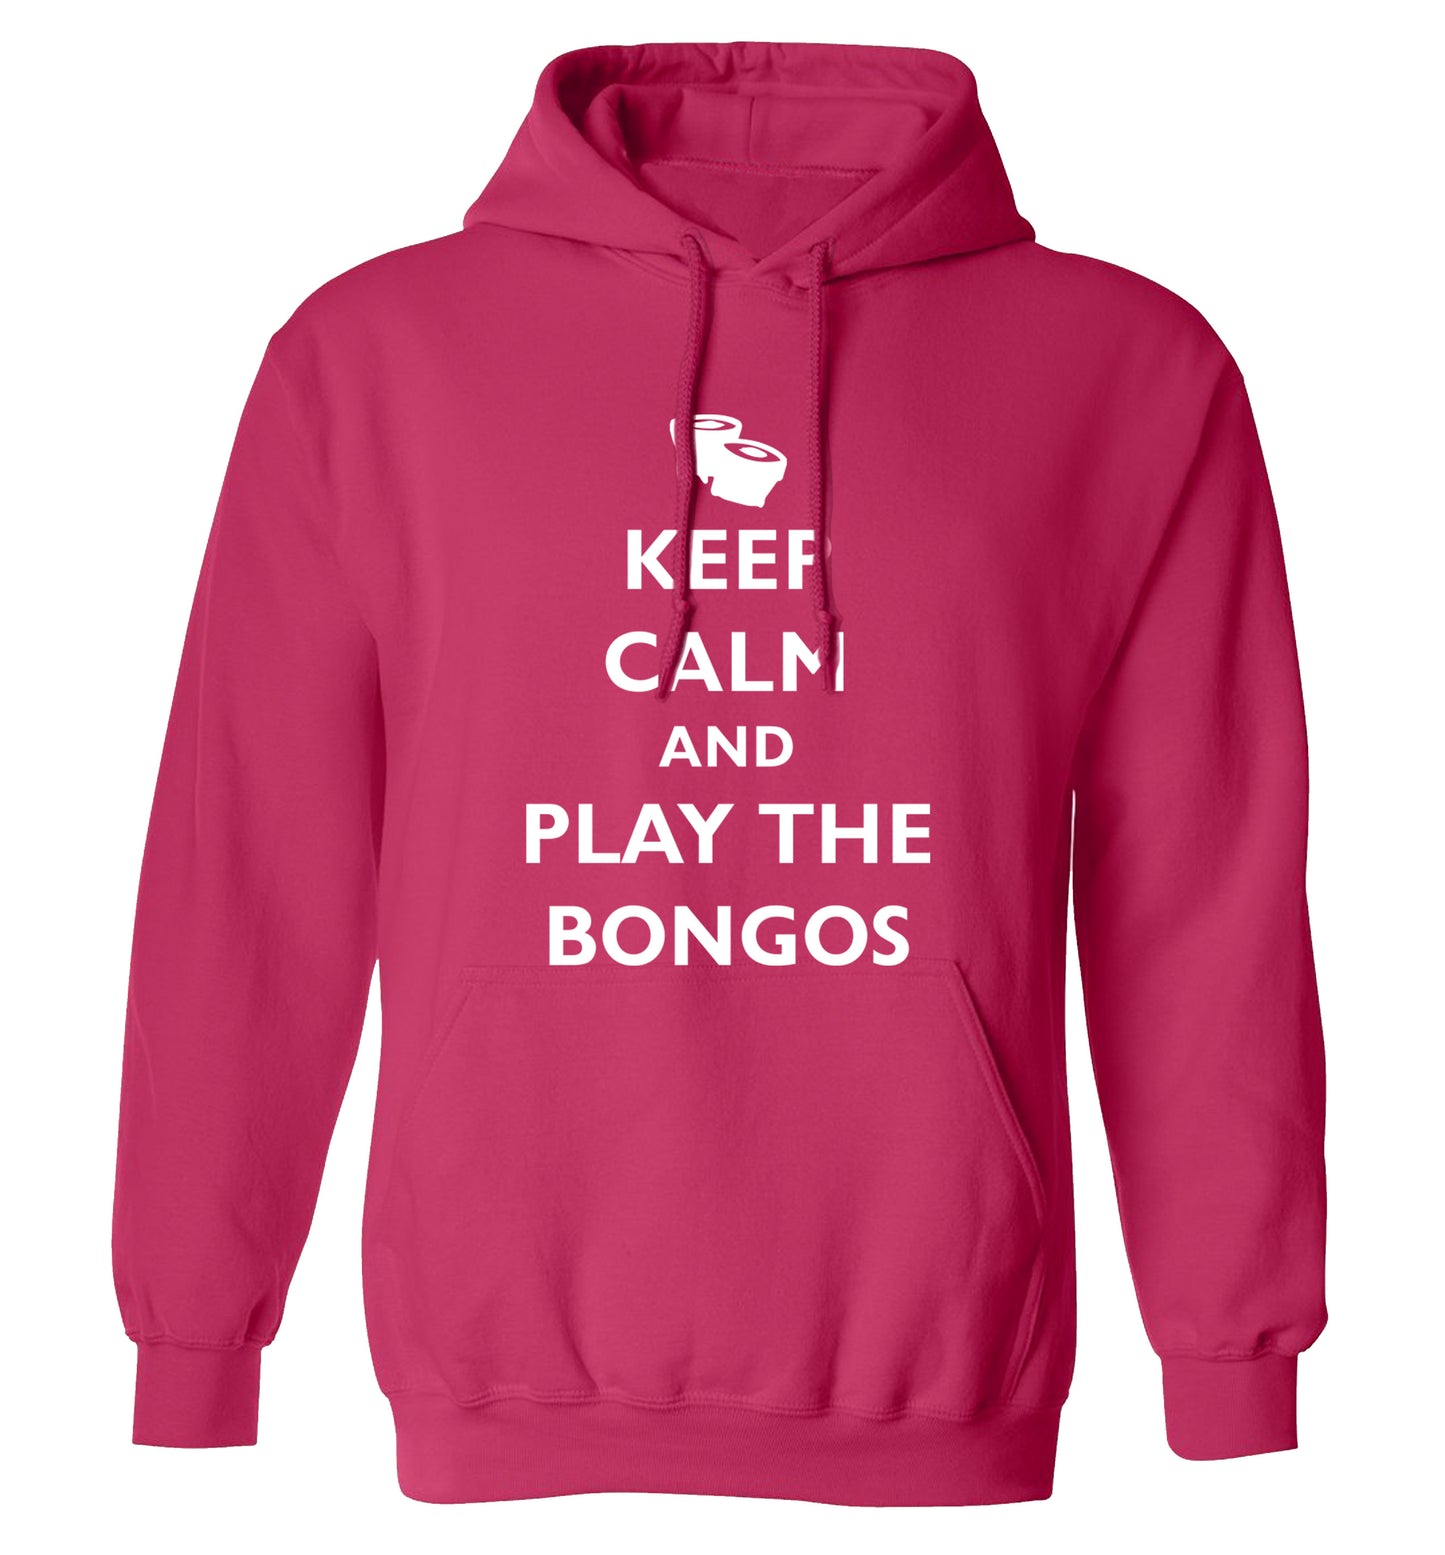 Keep calm and play the bongos adults unisex pink hoodie 2XL